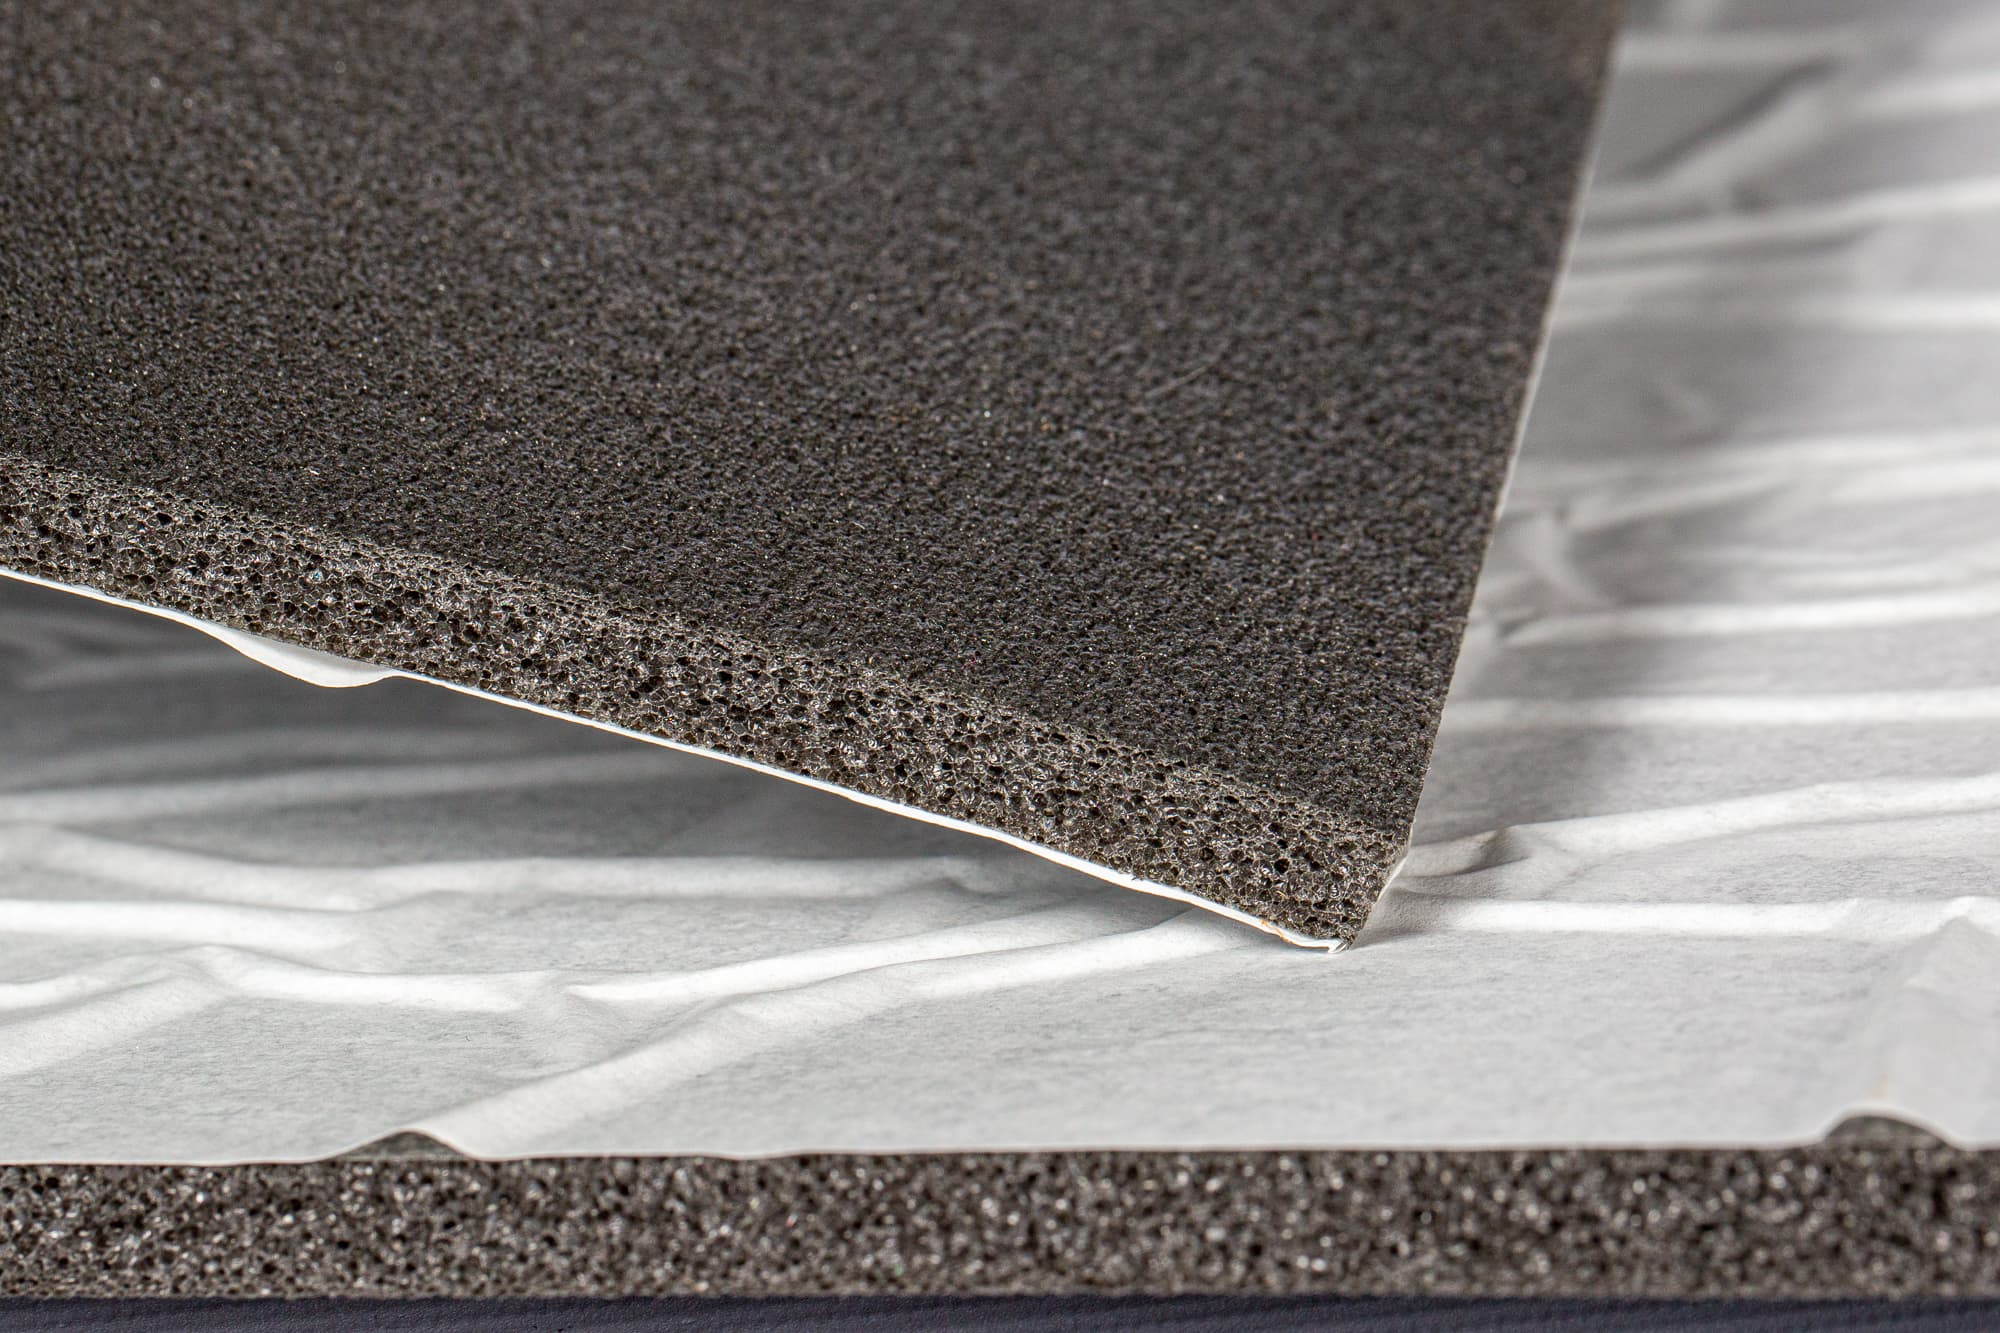 Vibrofiltr Materials For Acoustic Insulation Of Cars